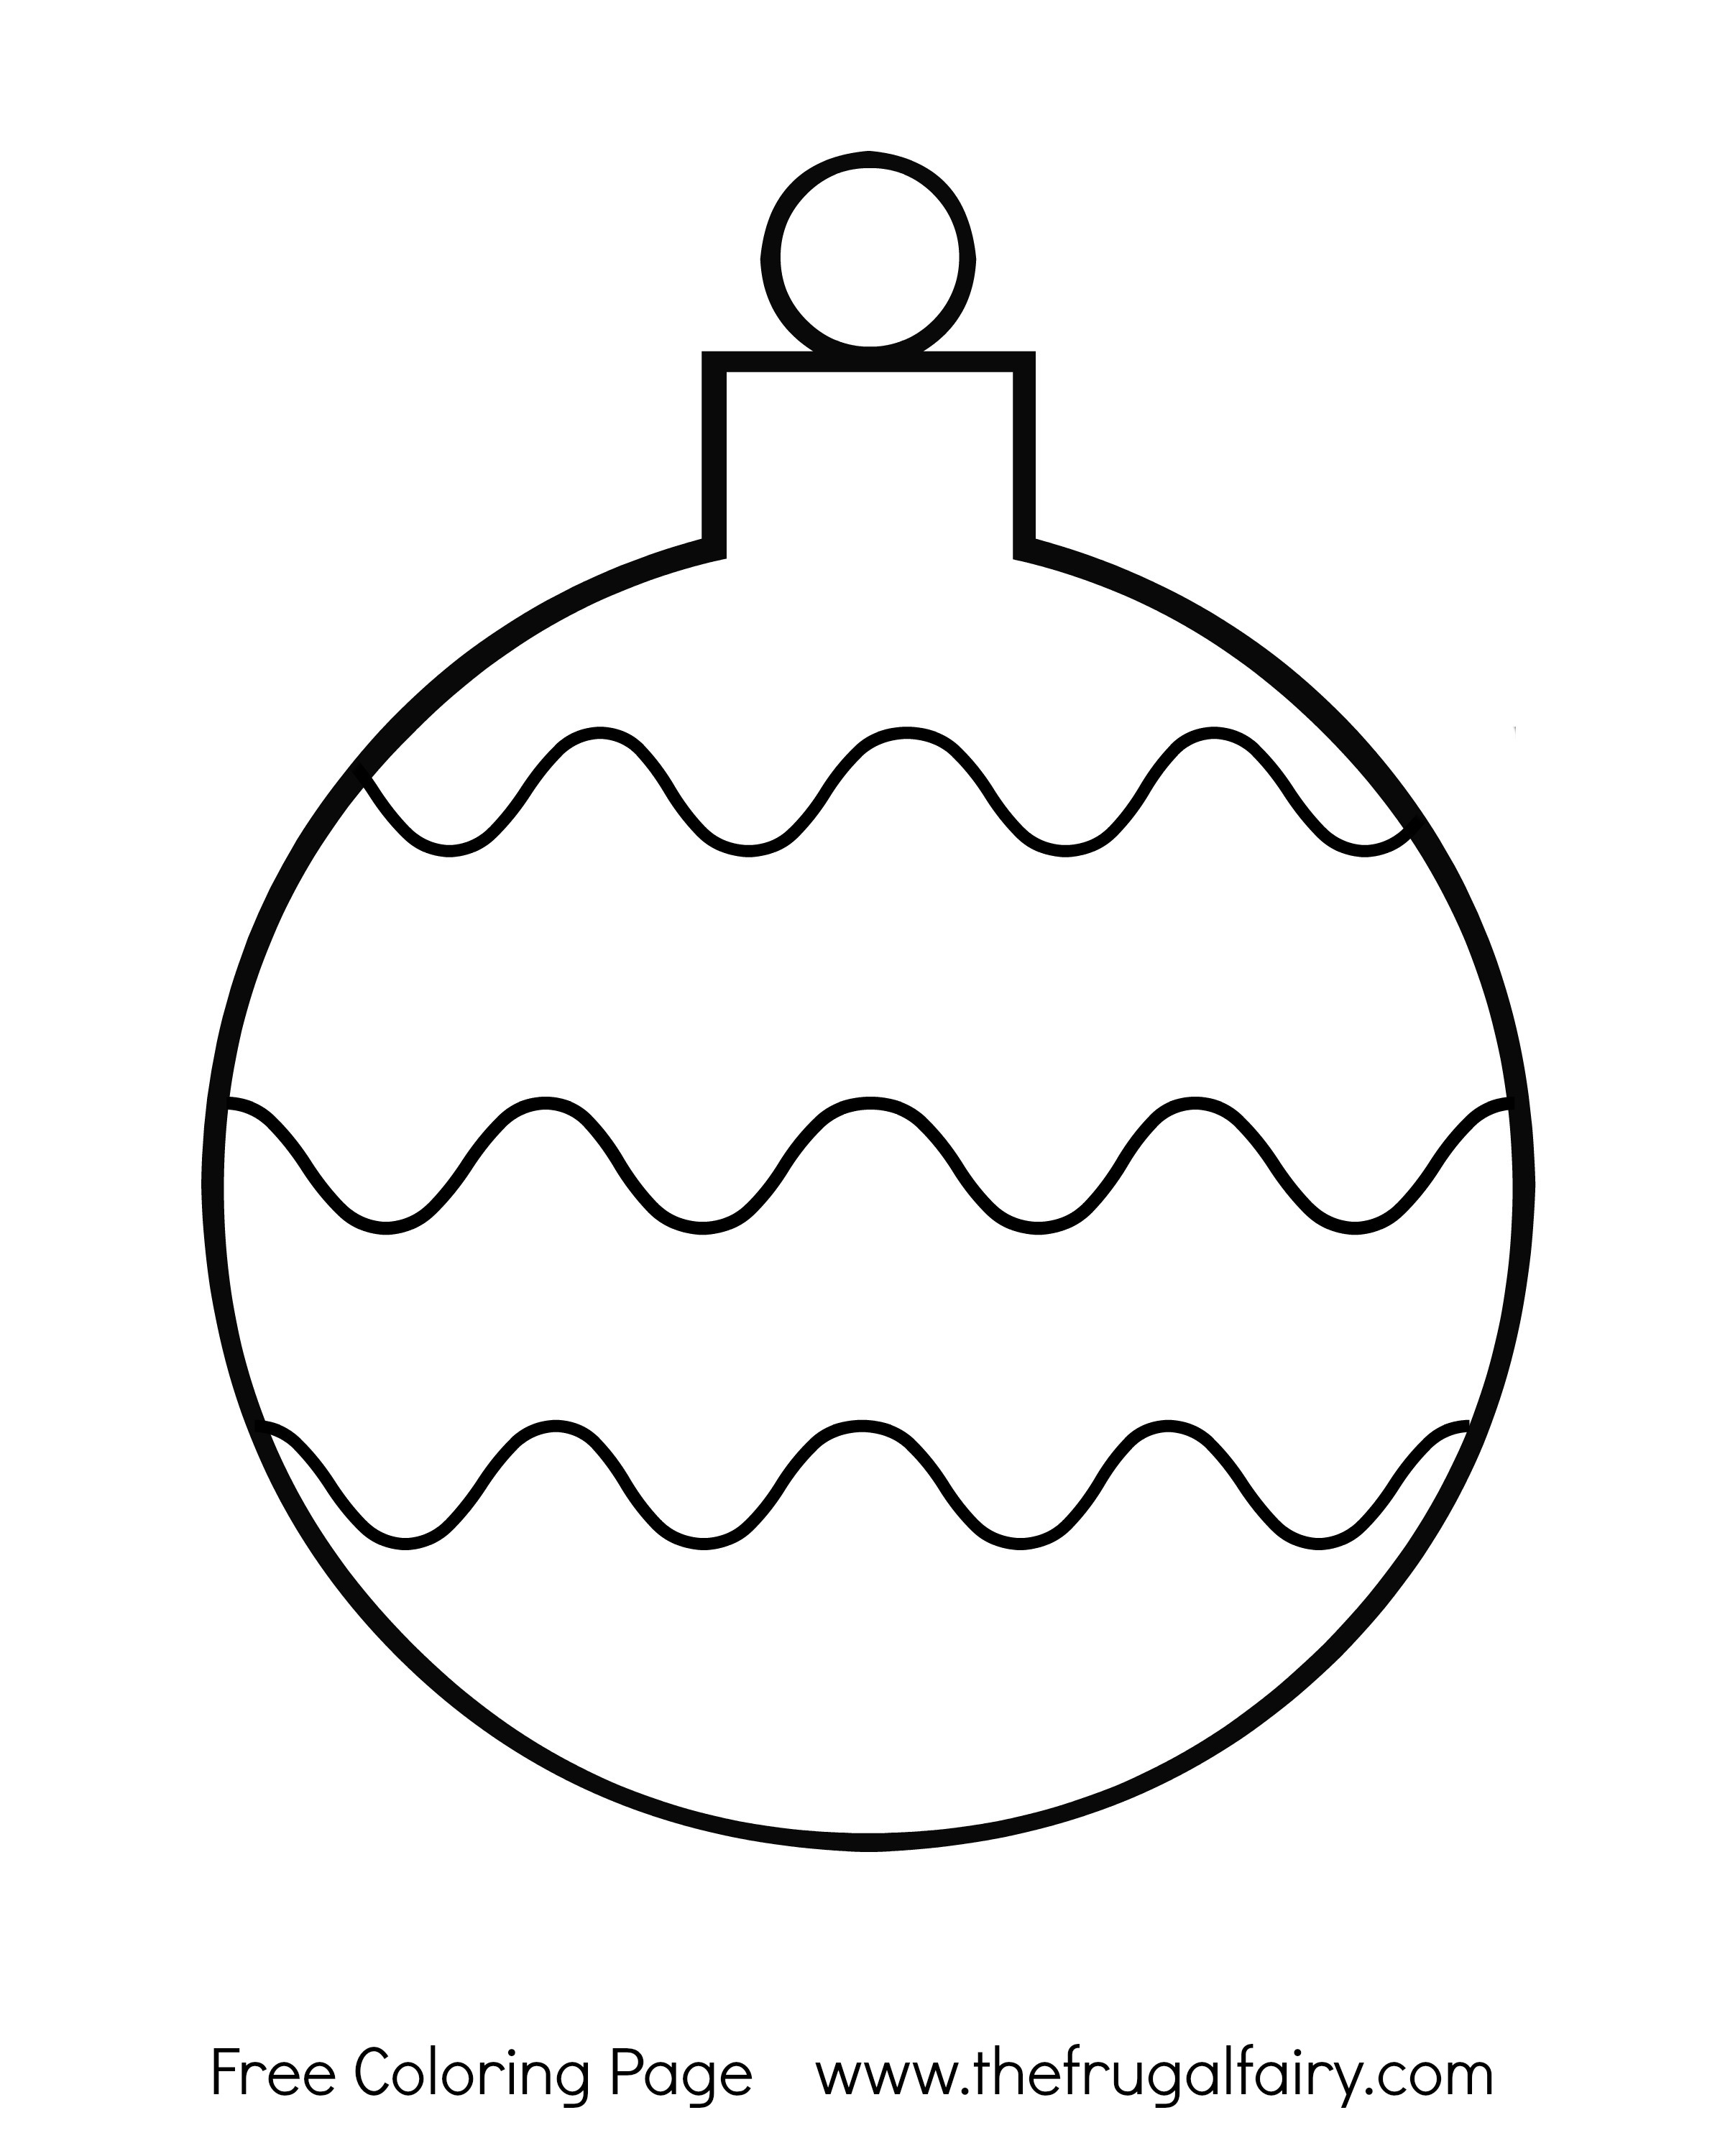 Printable Coloring Pages Of Christmas Ornaments - Printable Word Searches